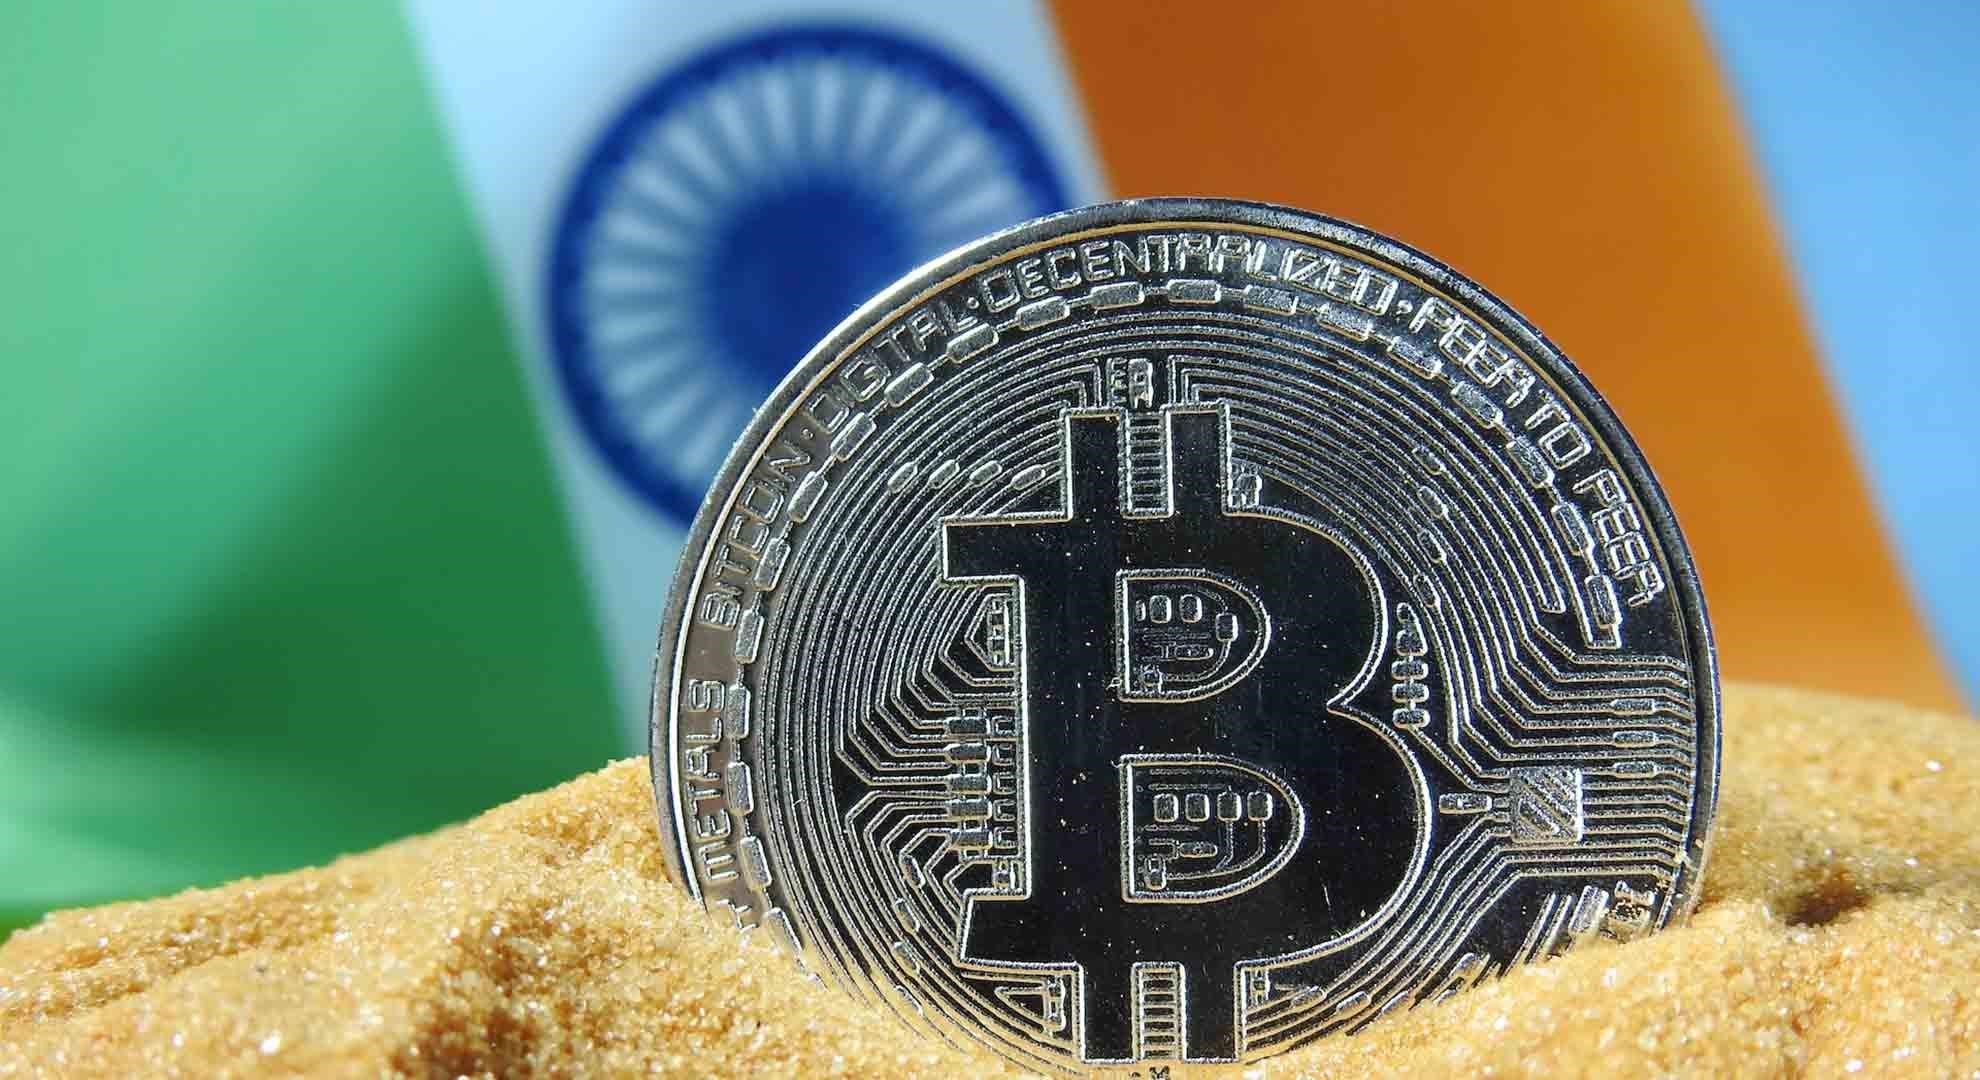 An image of a silver coin with a bitcoin logo laying in the sand, with the Indian flag in the background